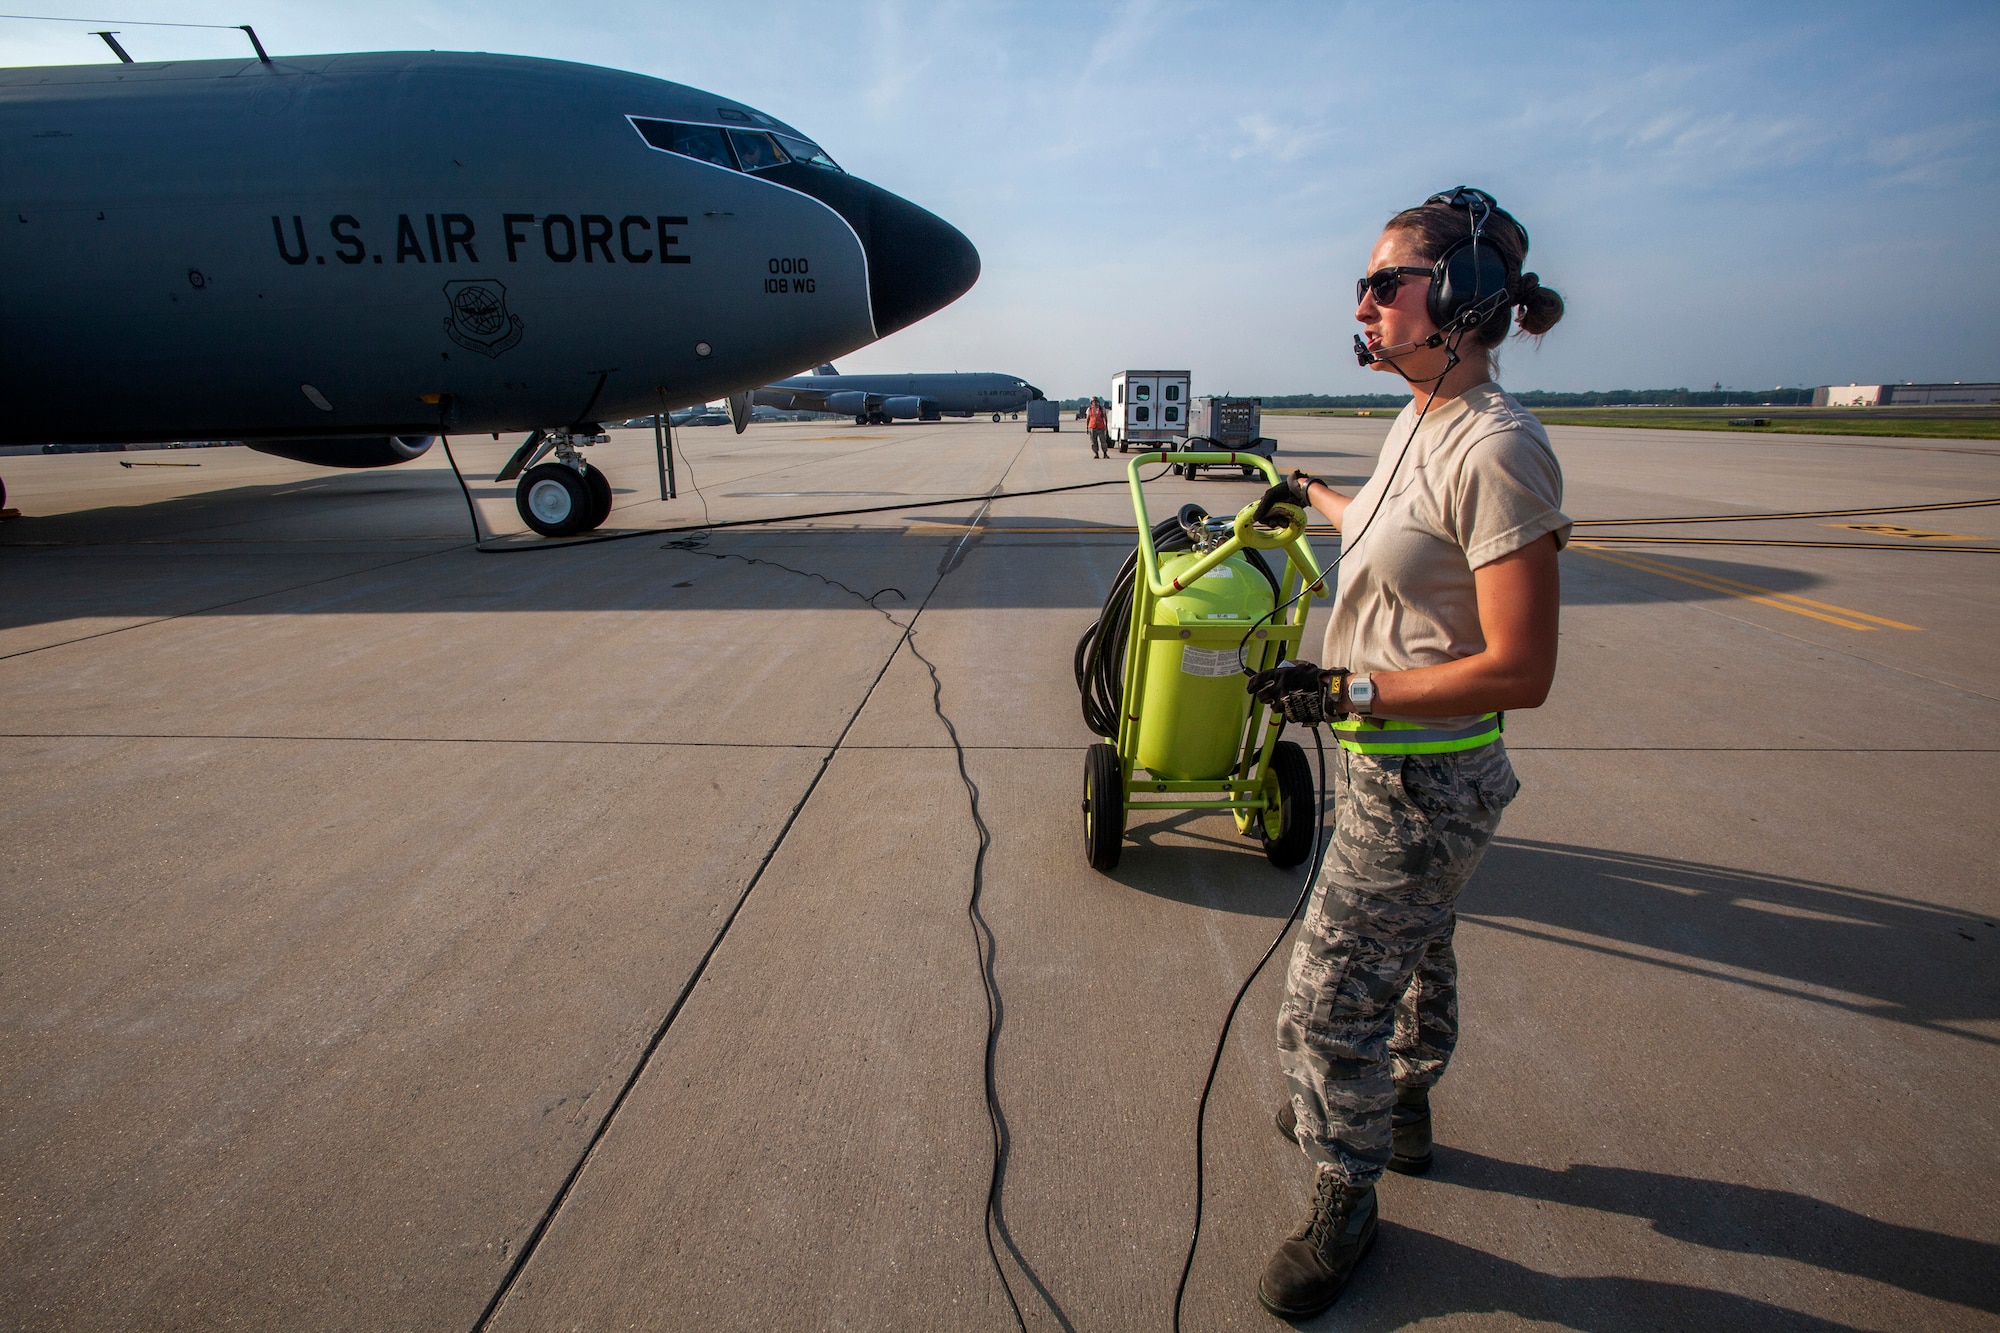 Senior Airman Ashley V. Chytraus, a crew chief with the 108th Wing, New Jersey Air National Guard, stands by as a KC-135R Stratotanker starts its engines for a training flight at Joint Base McGuire-Dix-Lakehurst, N.J., June 11, 2015. Chytraus was in a motorcycle accident June 21, 2014. The collision broke two vertebrae in Chytraus’s neck, crushed her hand, mangled the quadriceps tendon in her leg, forced two splintered ribs into her liver and fractured her elbow. In addition, she died while being medevaced to the hospital. 358 days later, she passed all portions of the Air Force Physical Fitness Test and received an excellent. (U.S. Air Force photo by Master Sgt. Mark C. Olsen/Released)